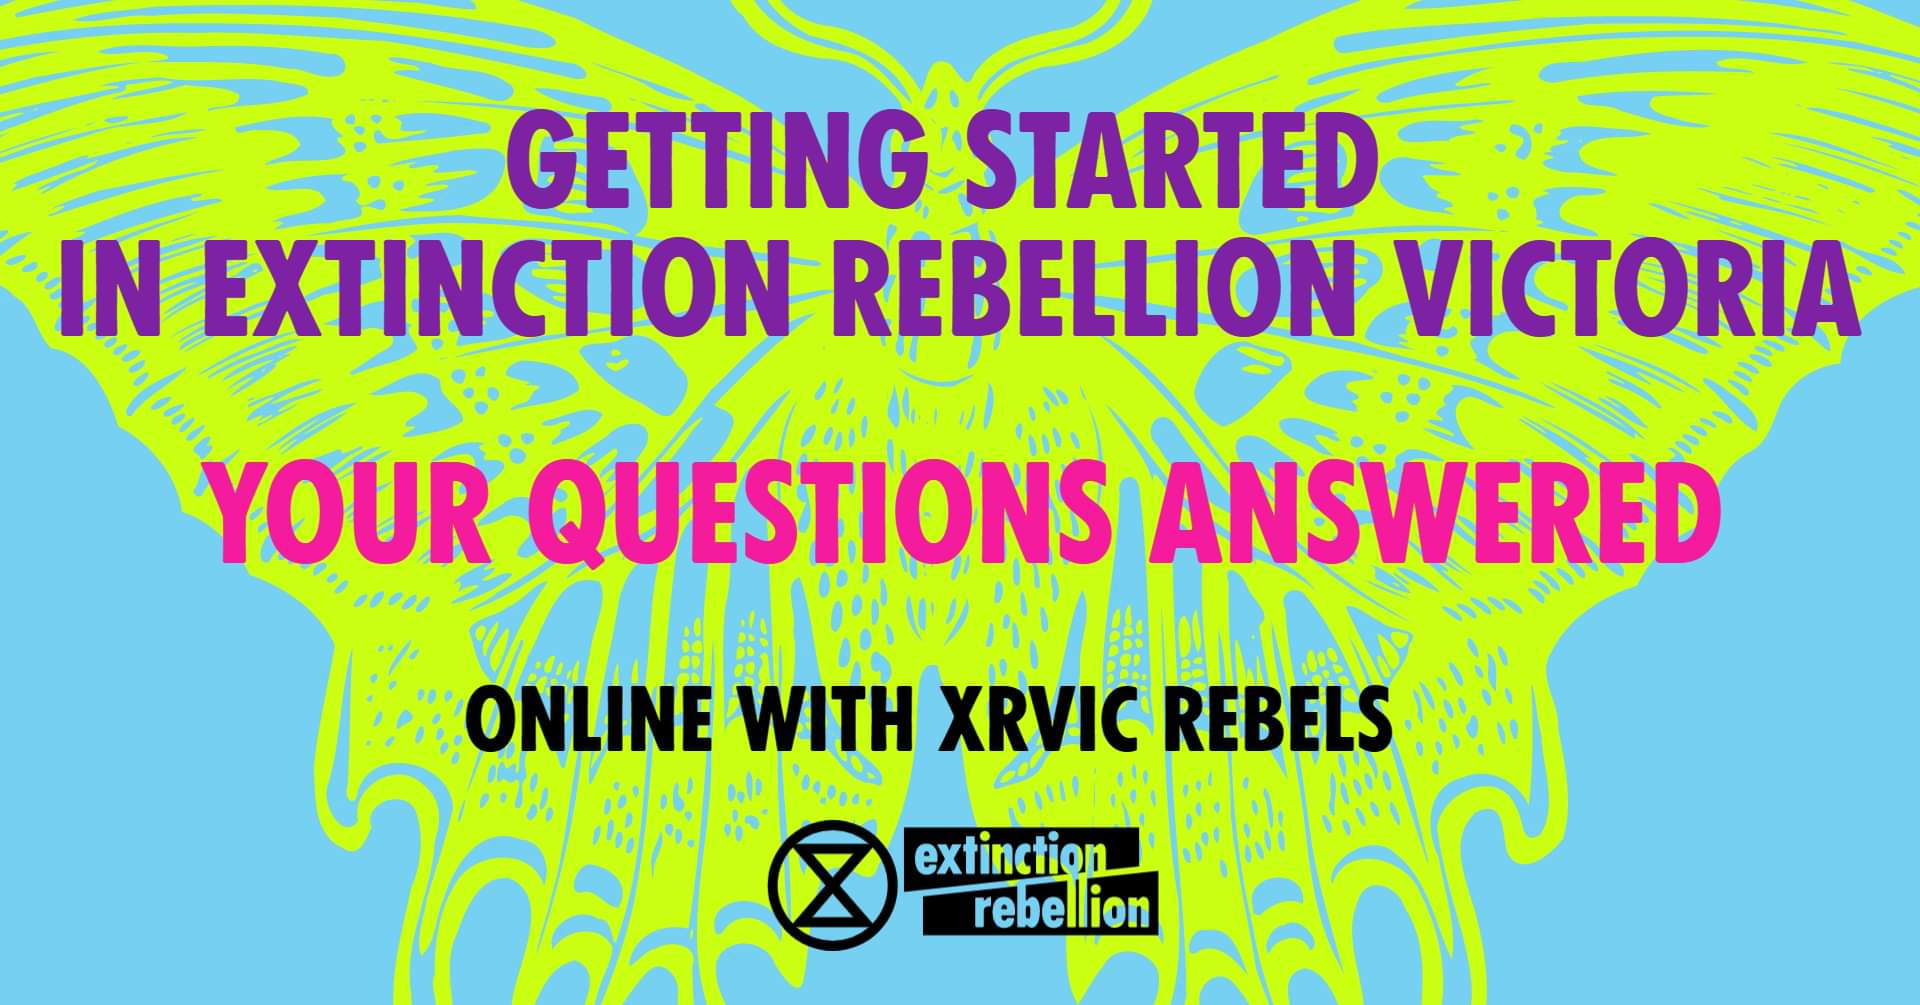 image for event Online - Getting Started in Extinction Rebellion Victoria - Your questions answered - VIC - Training